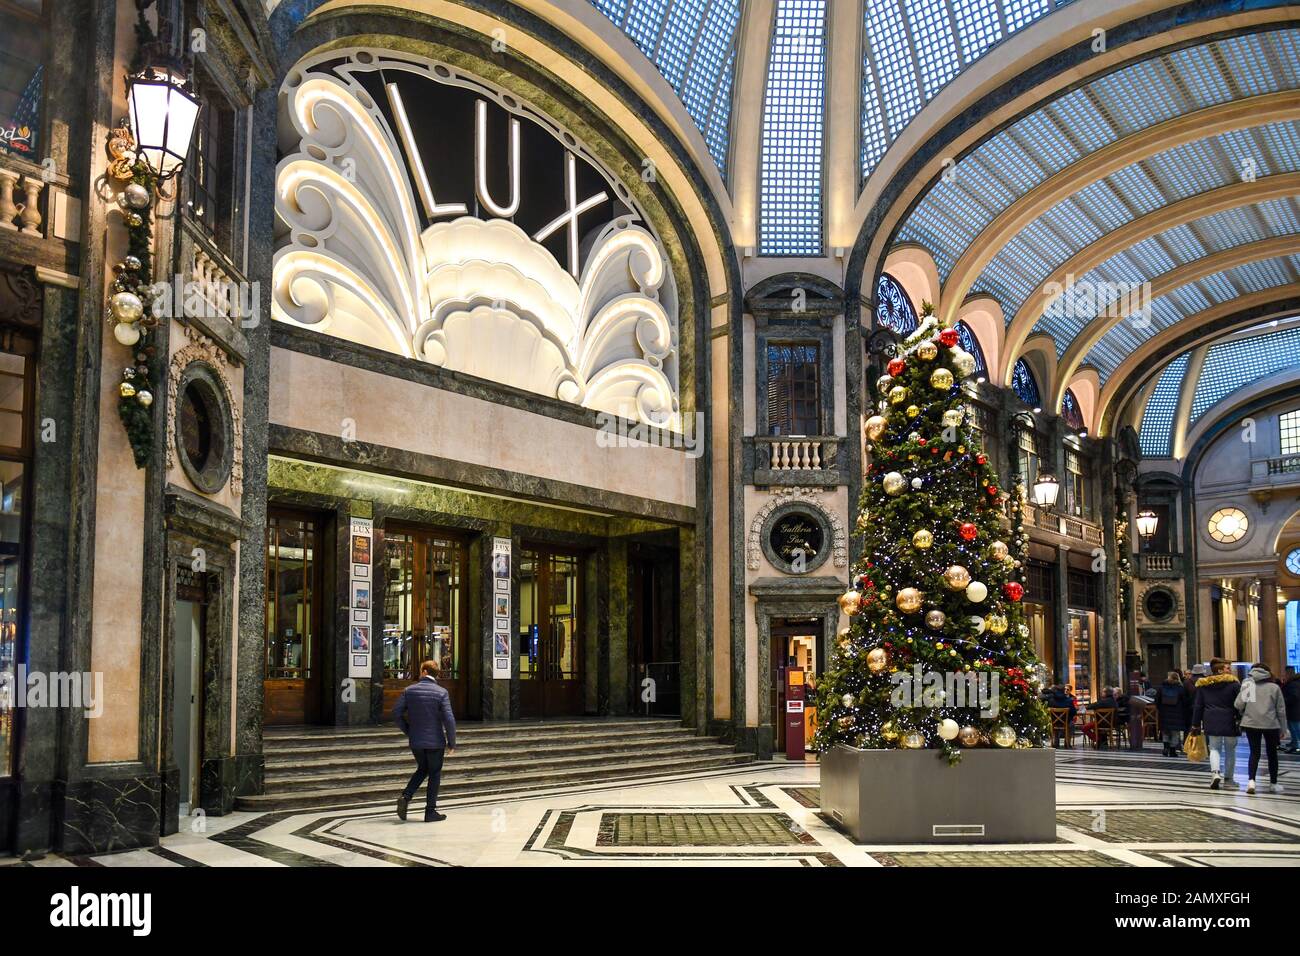 Glimpse of San Federico Gallery with a Christmas tree in front of the entrance of the historic Lux Cinema in the city centre of Turin, Piedmont, Italy Stock Photo